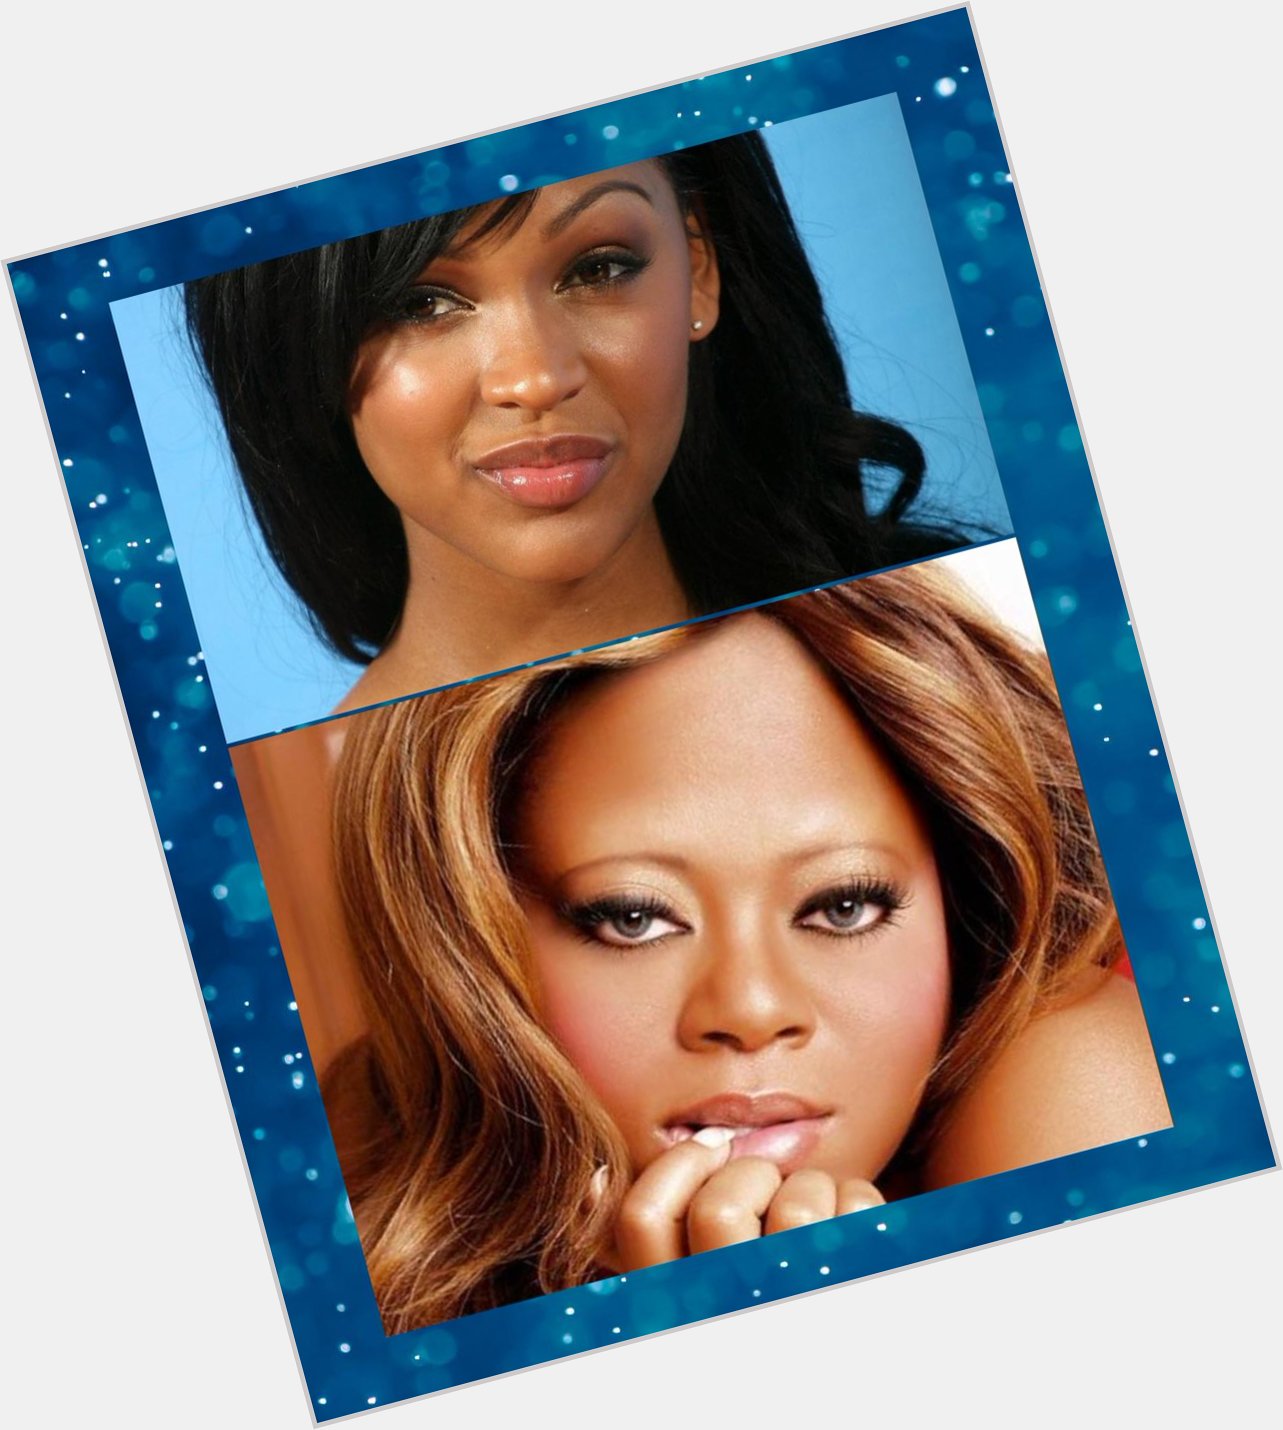   wishes Meagan Good and Countess Vaughn, a very happy birthday  